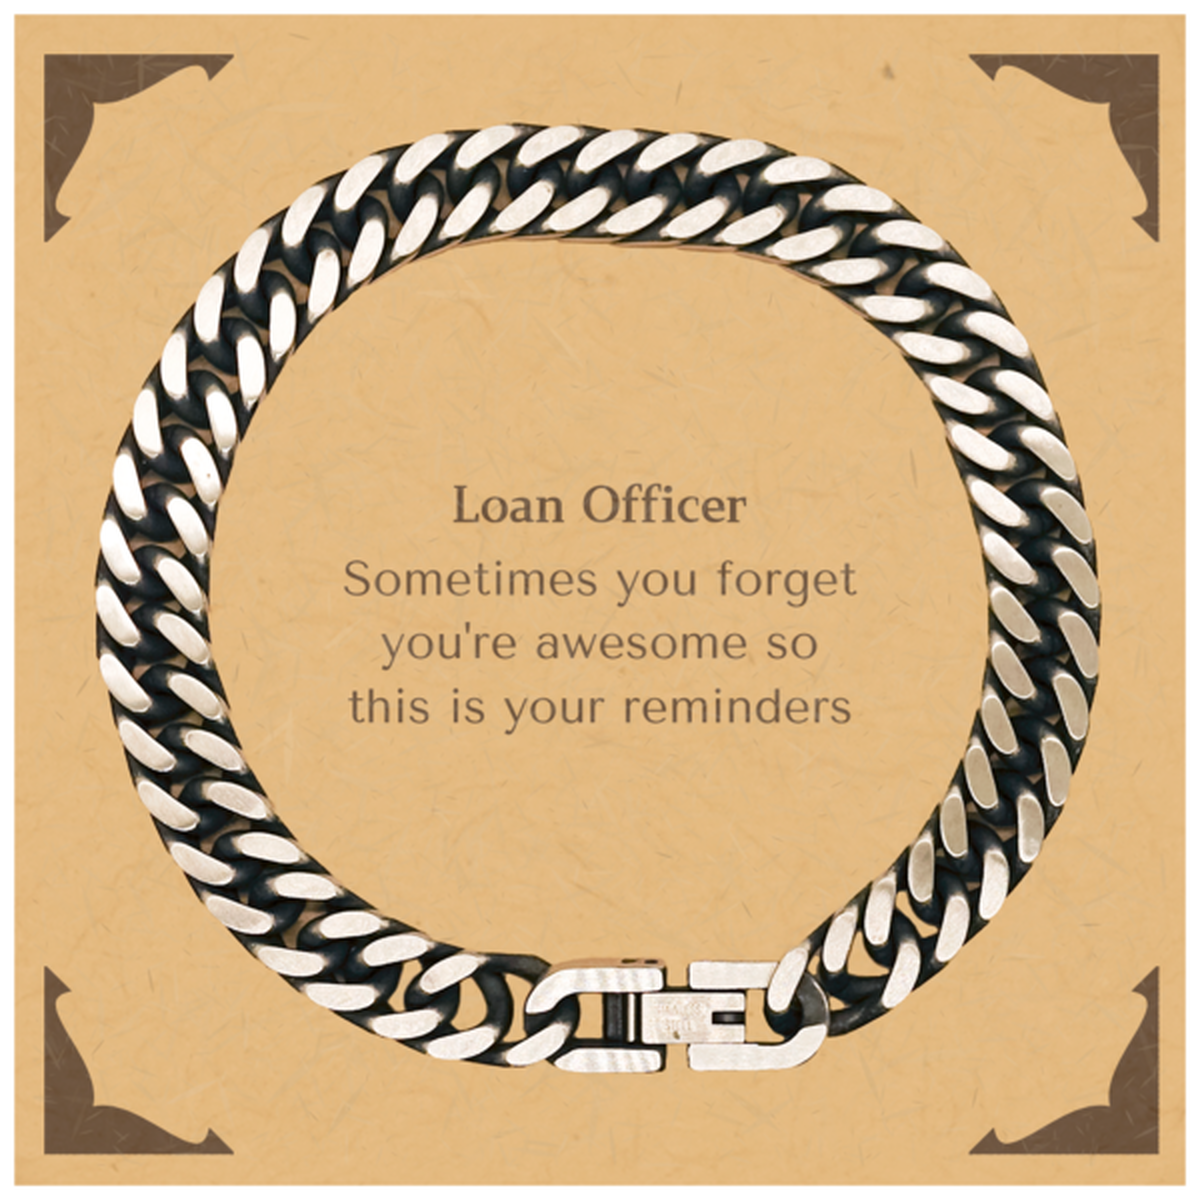 Sentimental Loan Officer Cuban Link Chain Bracelet, Loan Officer Sometimes you forget you're awesome so this is your reminders, Graduation Christmas Birthday Gifts for Loan Officer, Men, Women, Coworkers